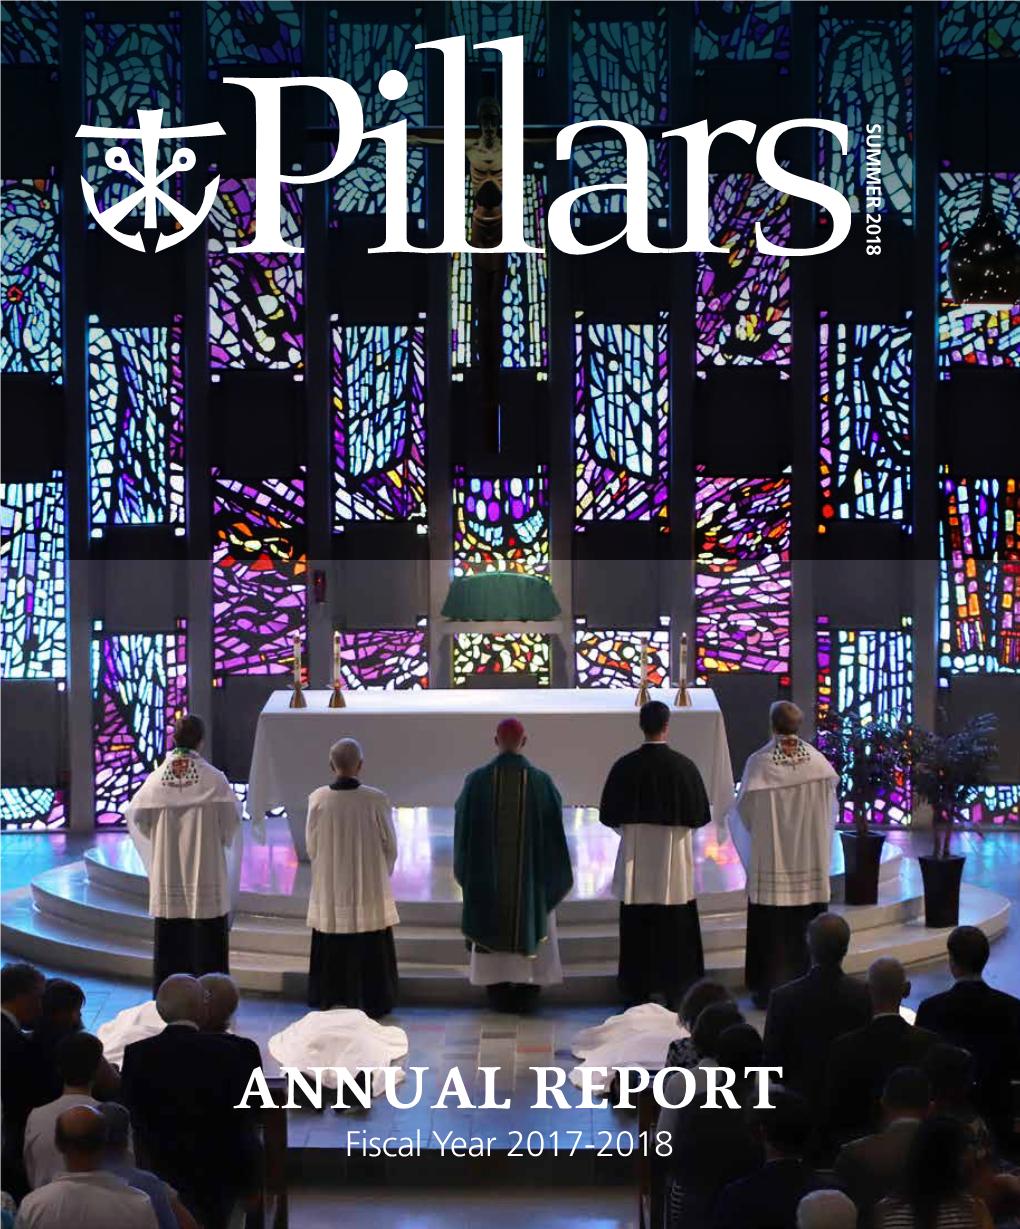 ANNUAL REPORT Congregation of Holy Cross